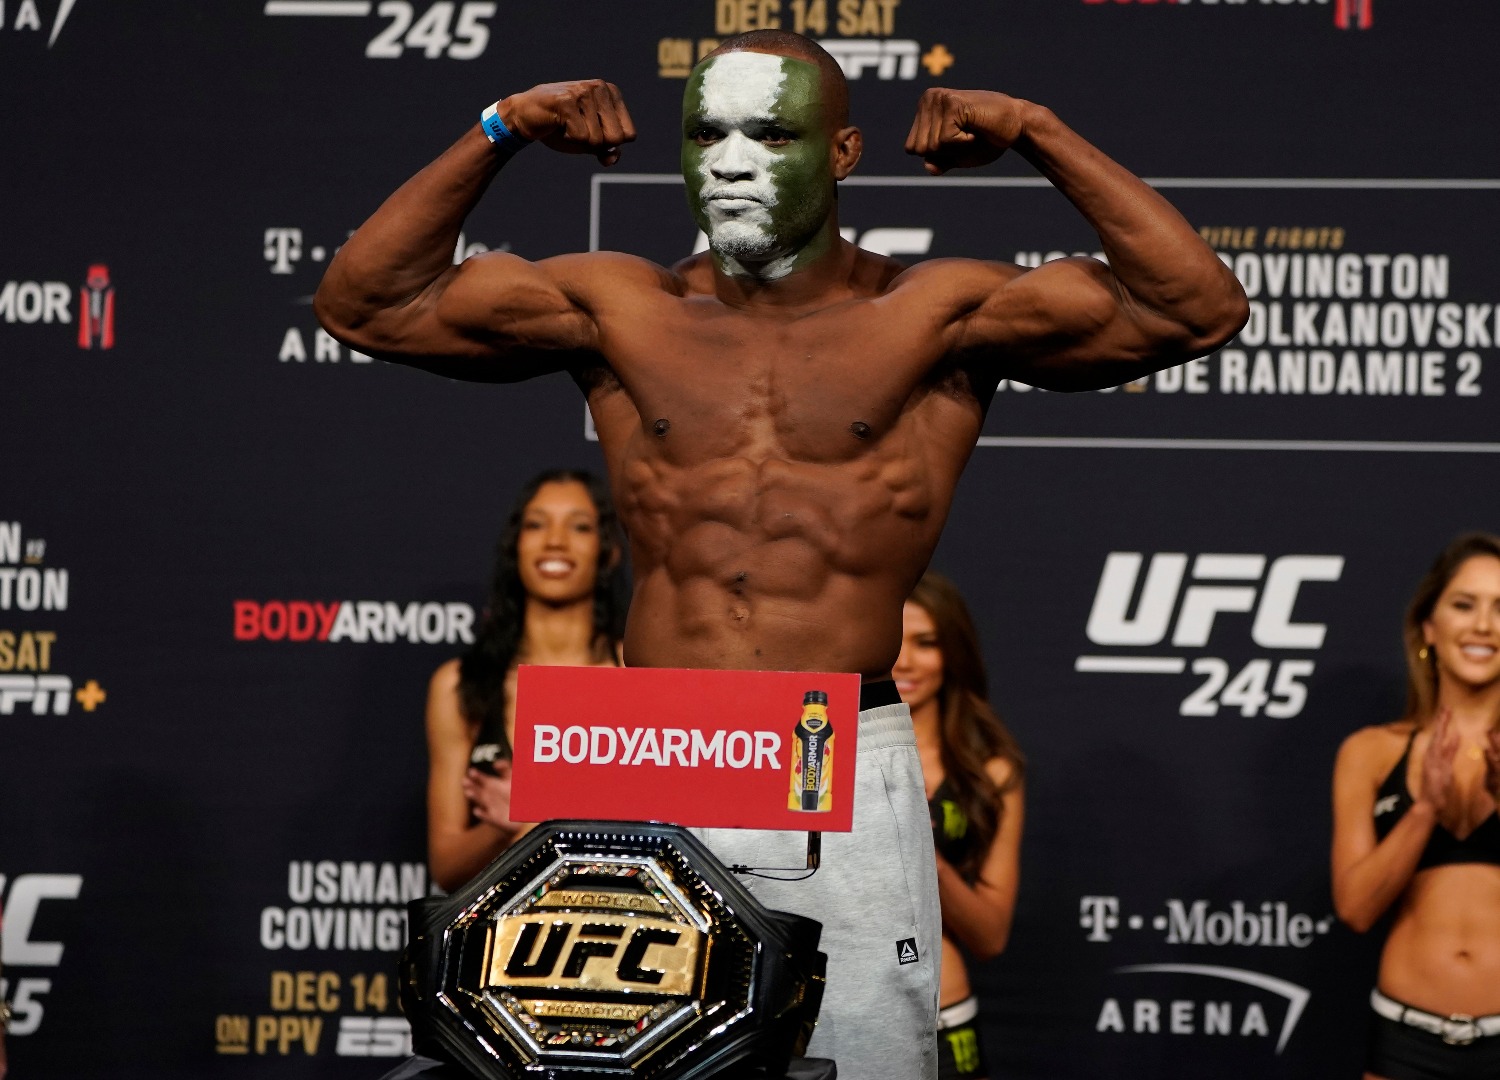 Kamaru Usman has racked up an impressive net worth as one of the top fighters in UFC.